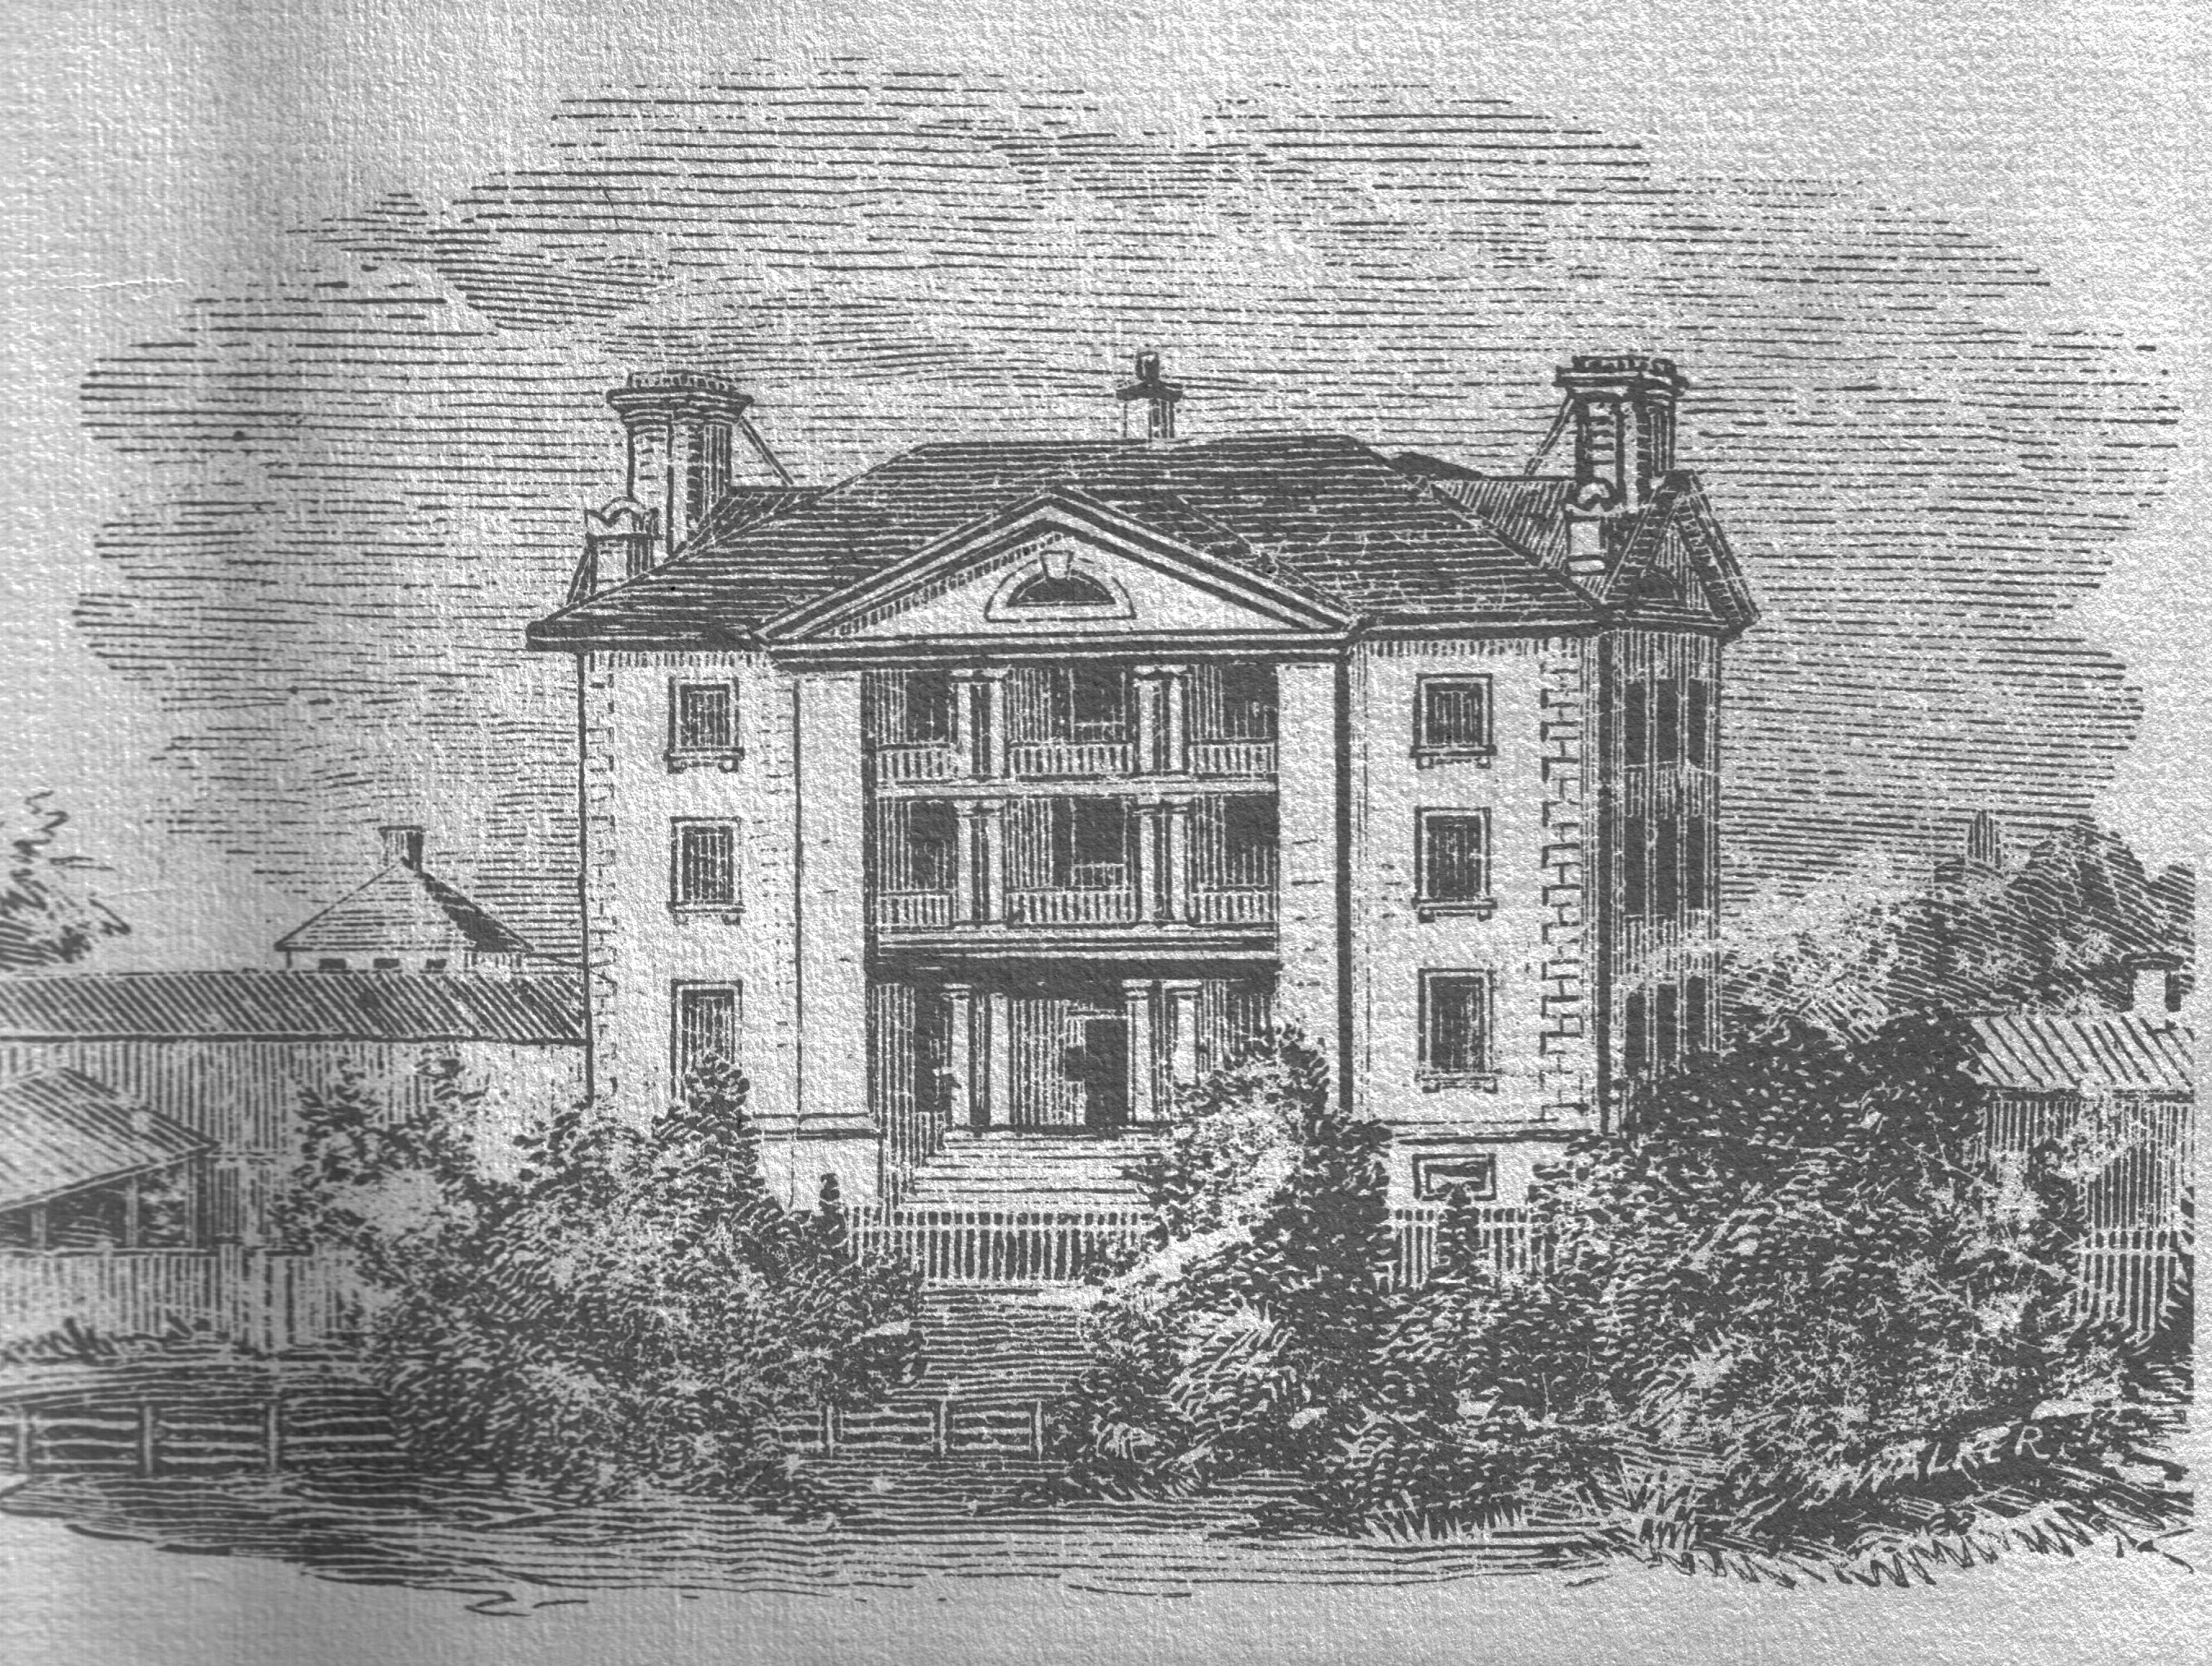 A view of KGH from the 1850's.